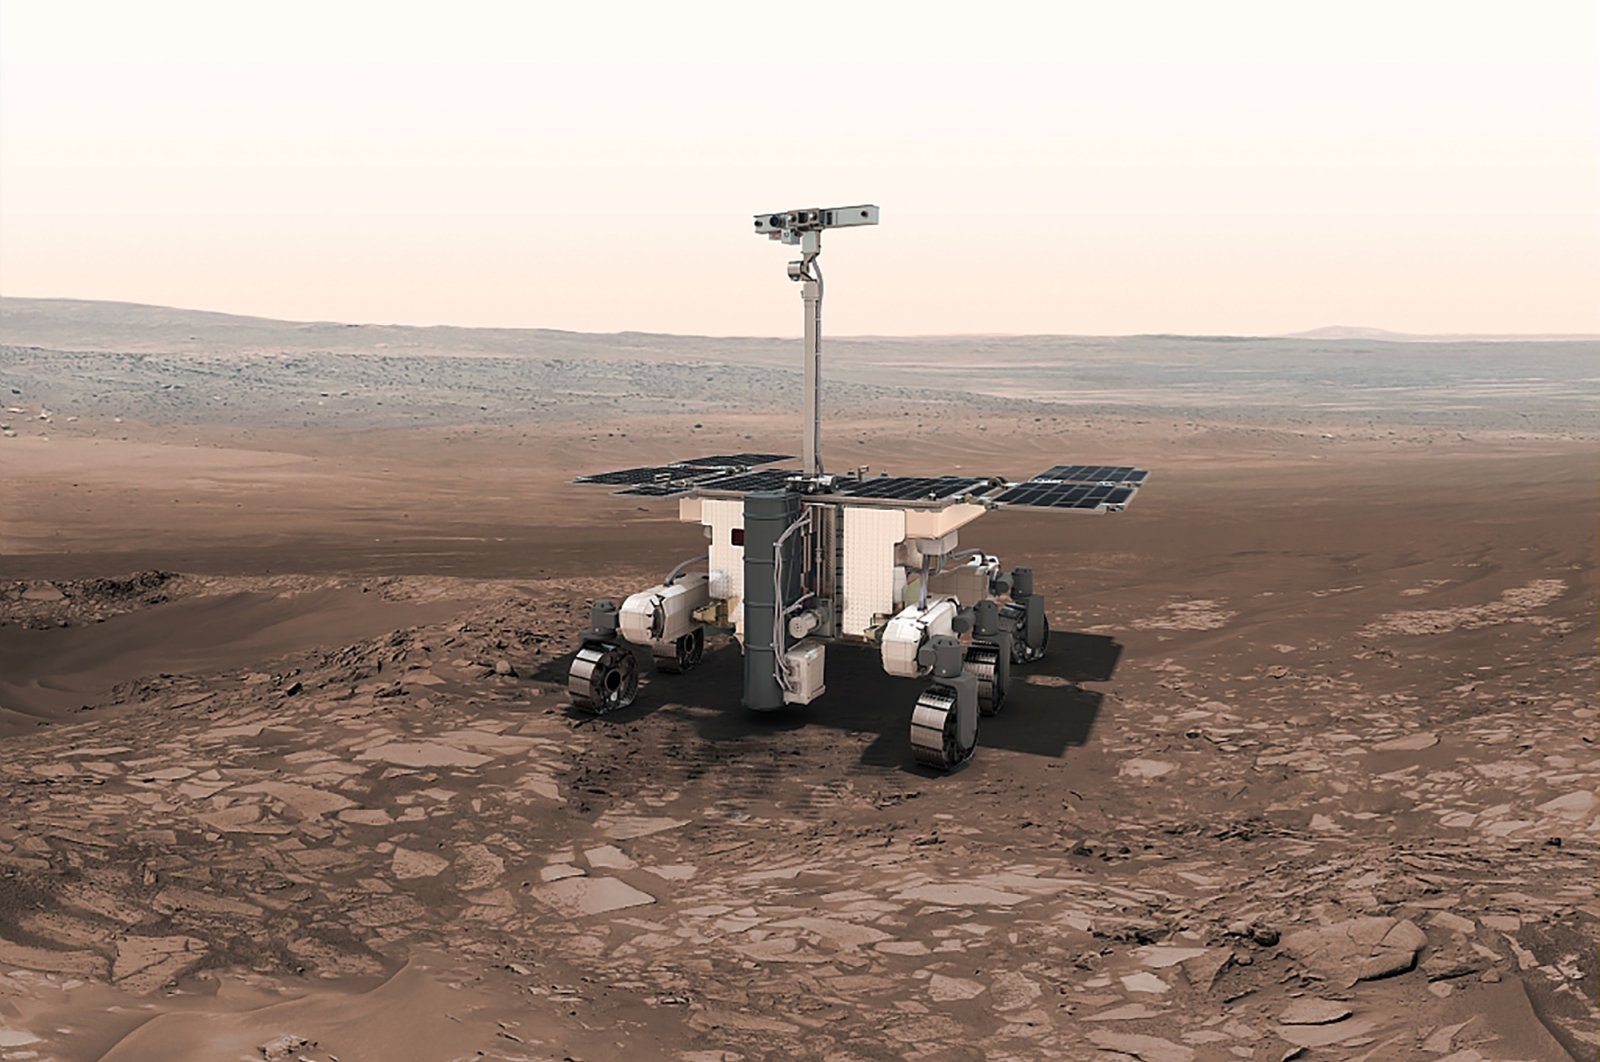 This undated artist rendition provided by the European Space Agency shows the ExoMars robot on Mars. (European Space Agency via AP)